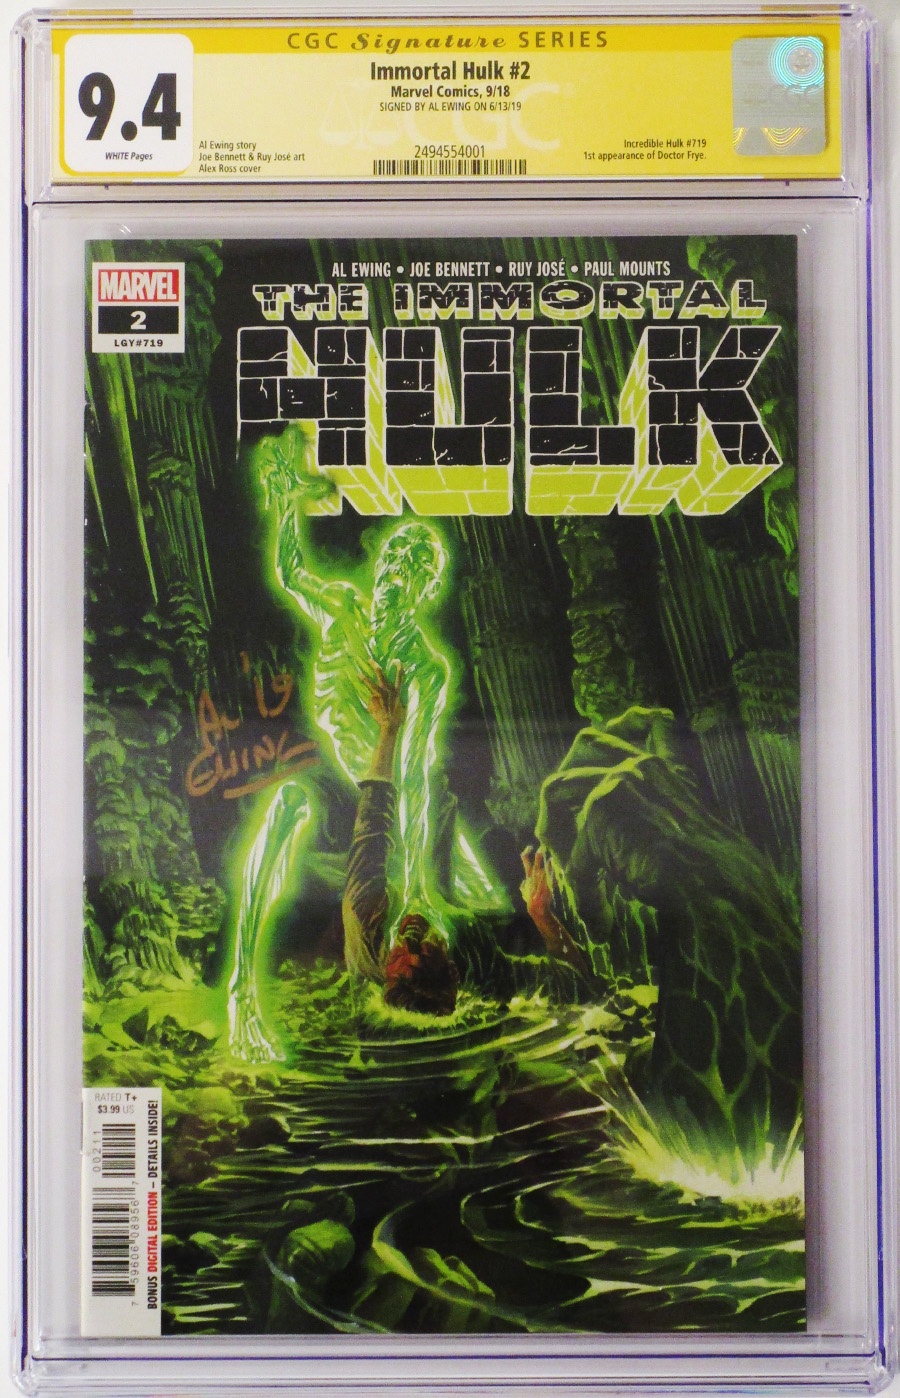 Immortal Hulk #2 Cover K CGC Signature Series 9.4 Signed by Al Ewing 1st Ptg Regular Alex Ross Cover